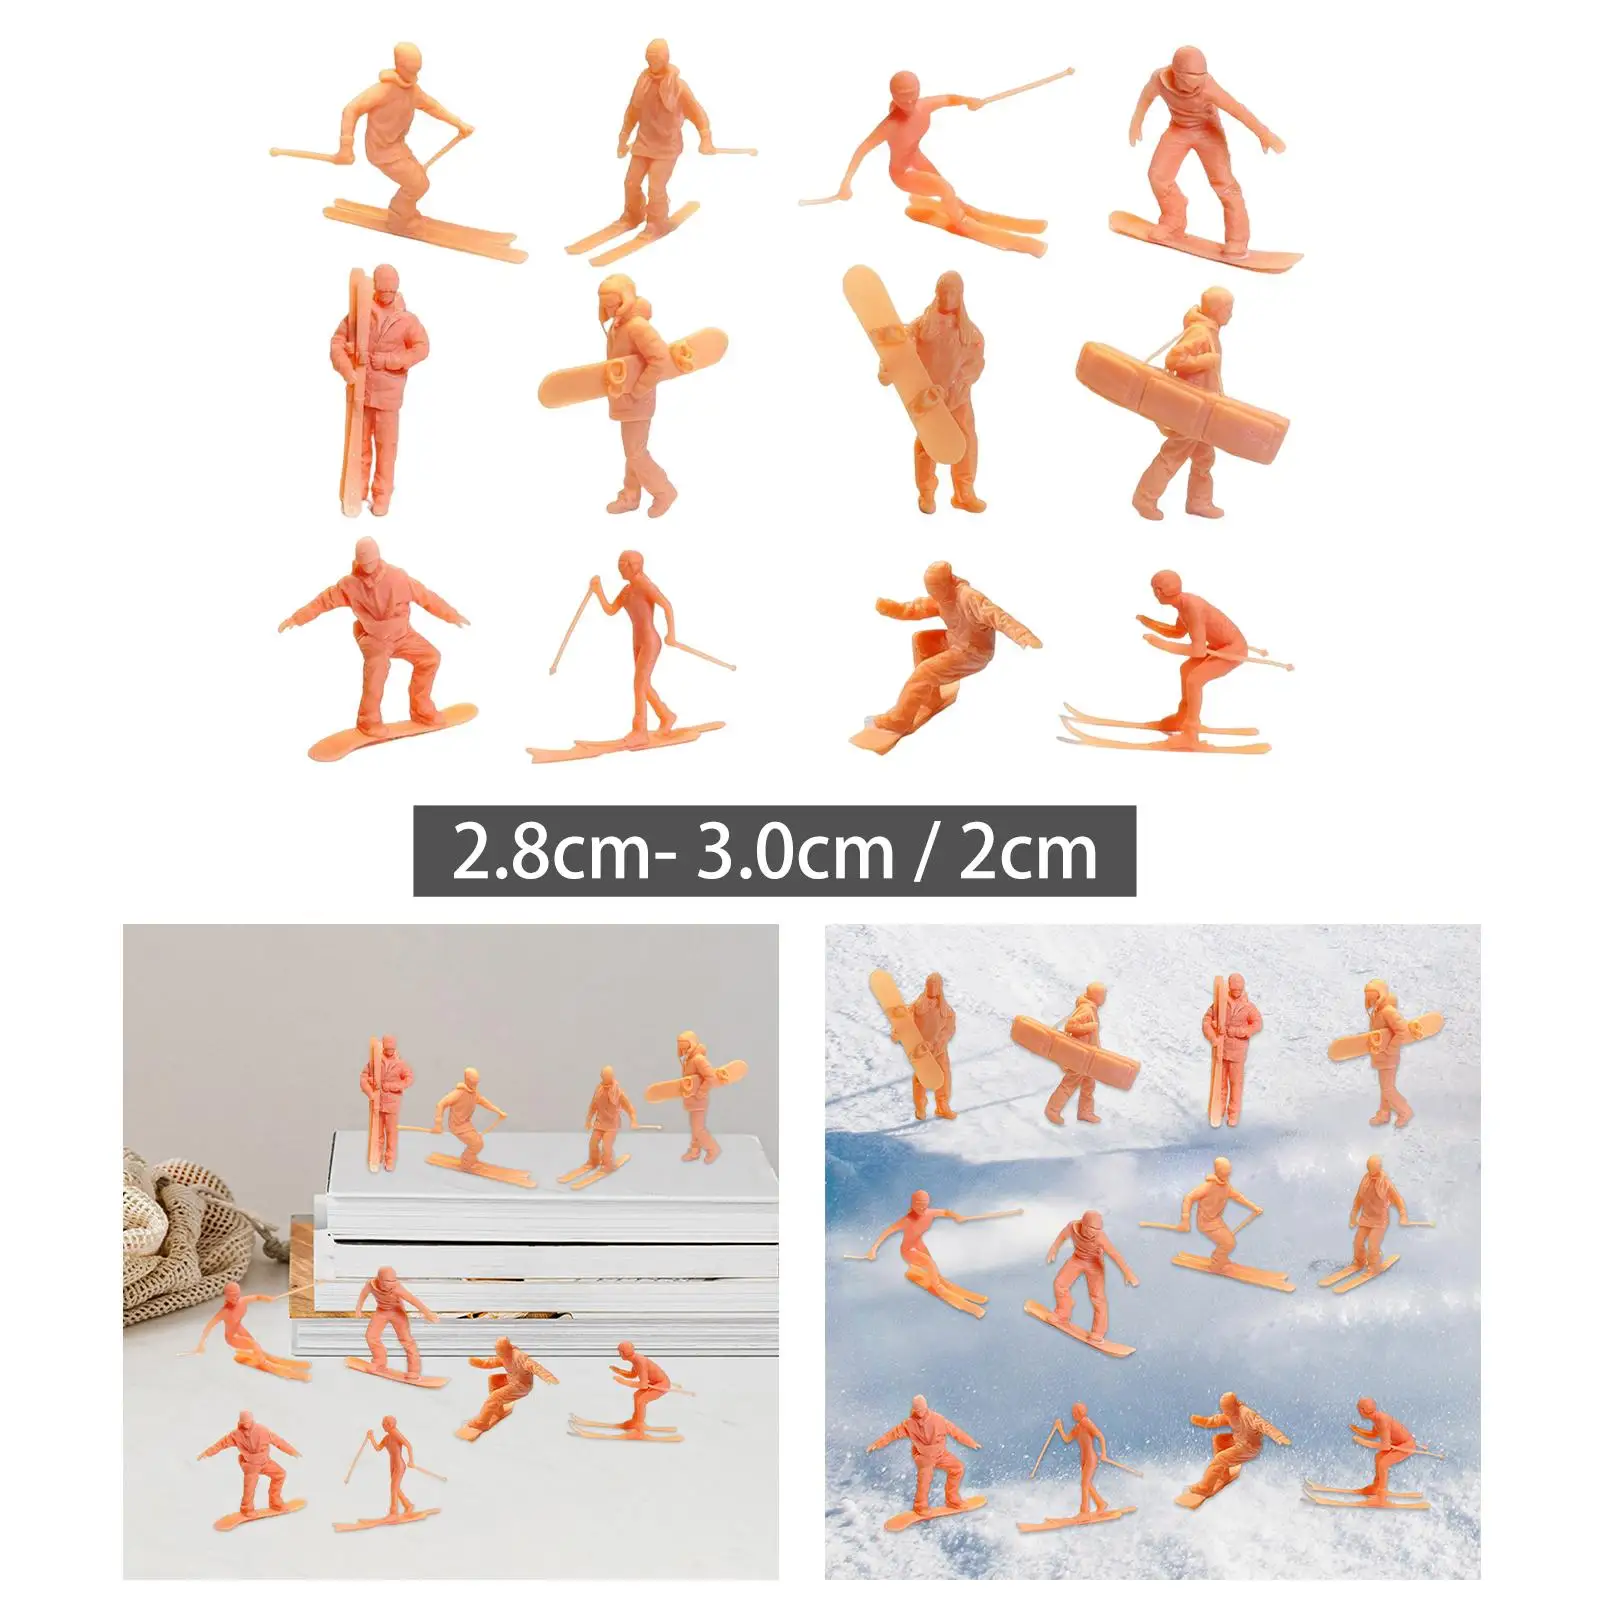 Simulation Skiing Figures Scenery Landscape Layout Doll Model for DIY Scene Architecture Model Ornament Accessories Collectible